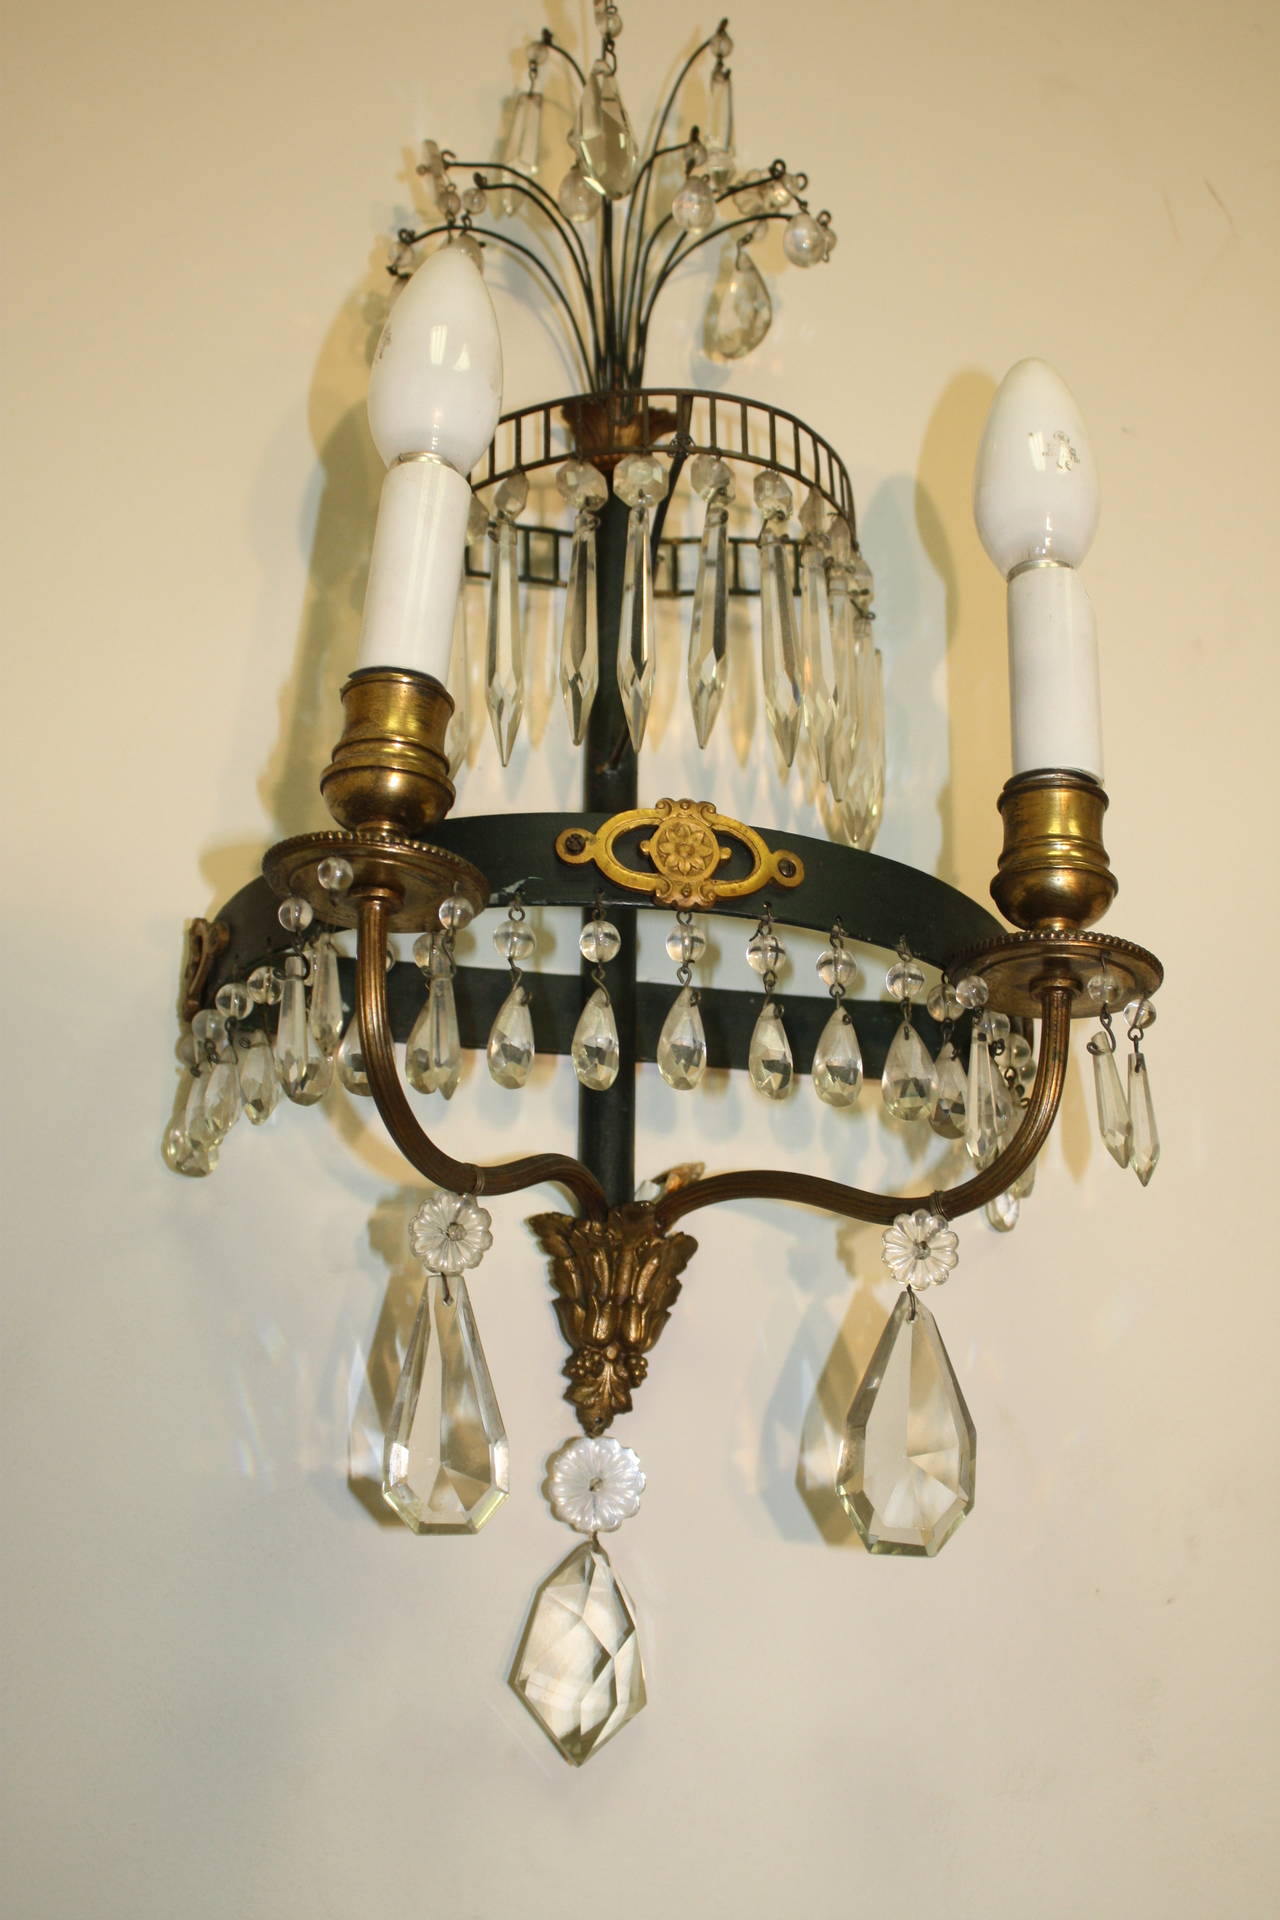 Pair of French Directoire Sconces In Good Condition For Sale In Stockbridge, GA